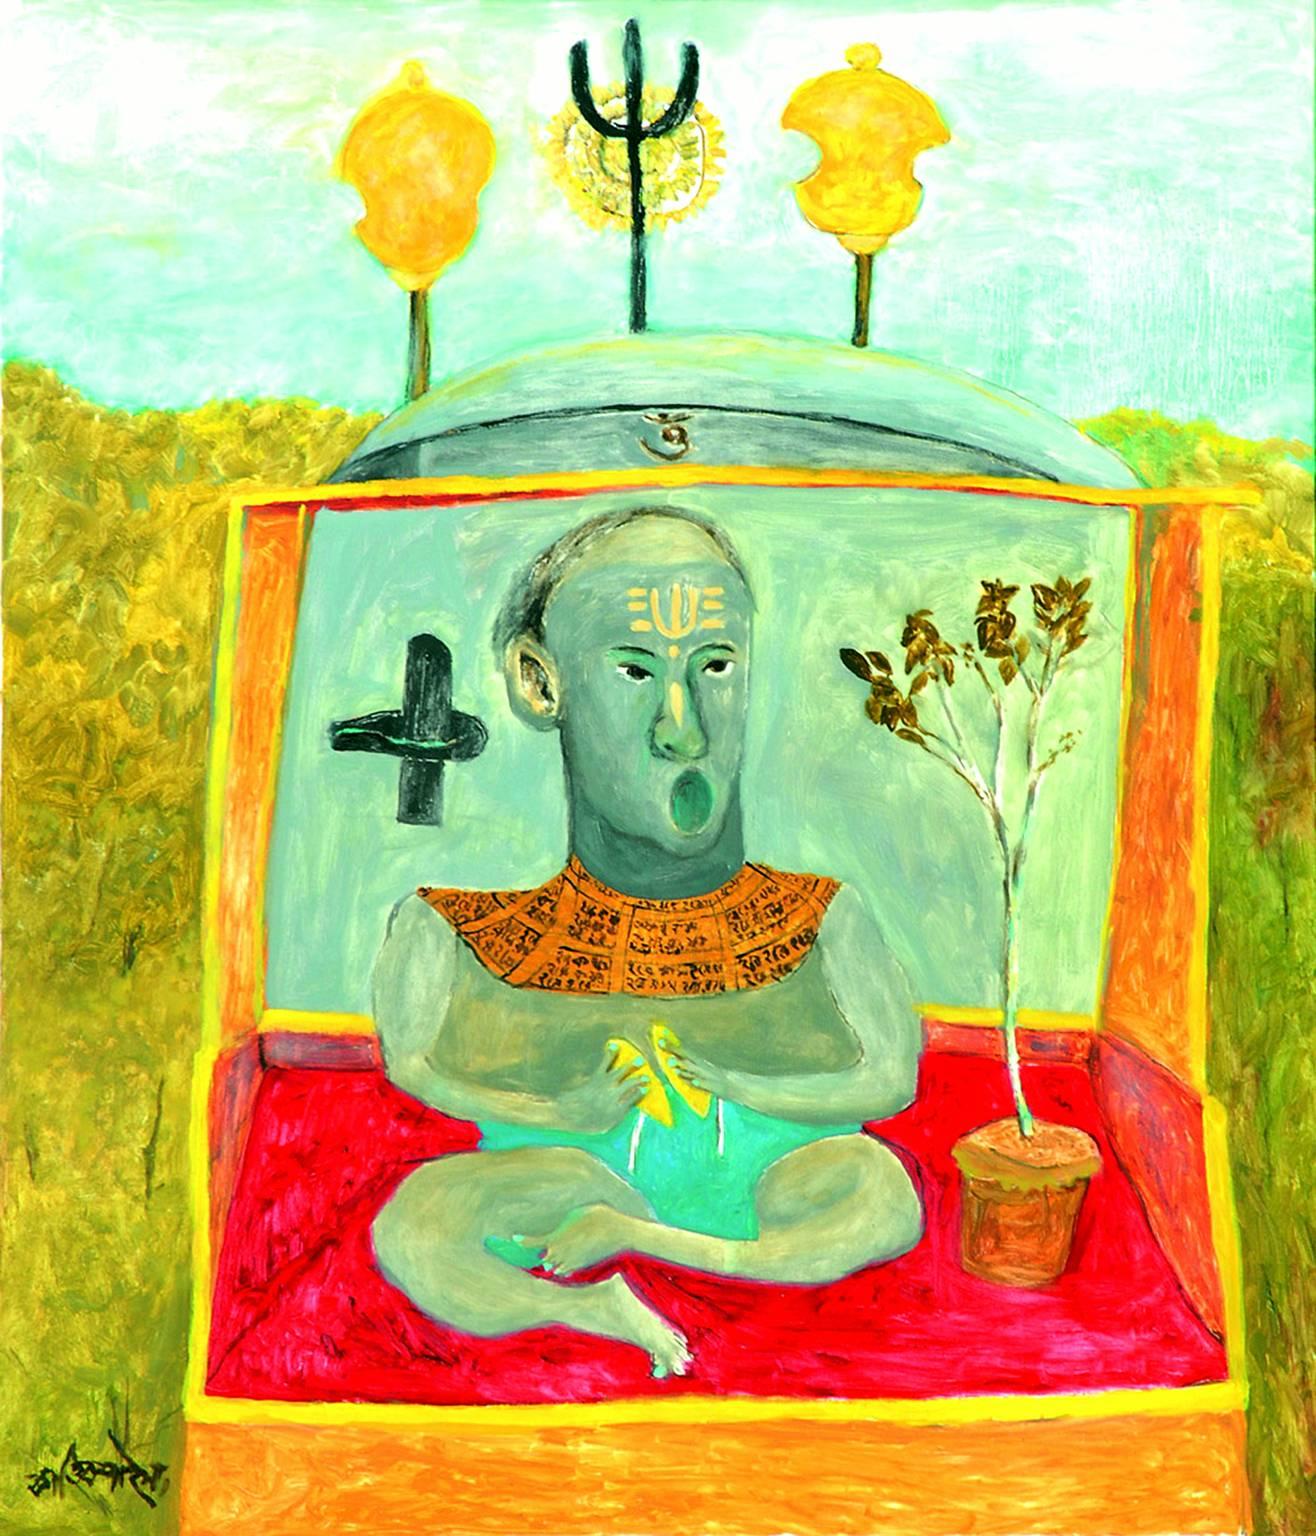 Kartick Chandra Pyne Figurative Painting - Kirtan, Oil, Acrylic, Canvas, Red, Yellow, Green Modern Indian Artist "In Stock"